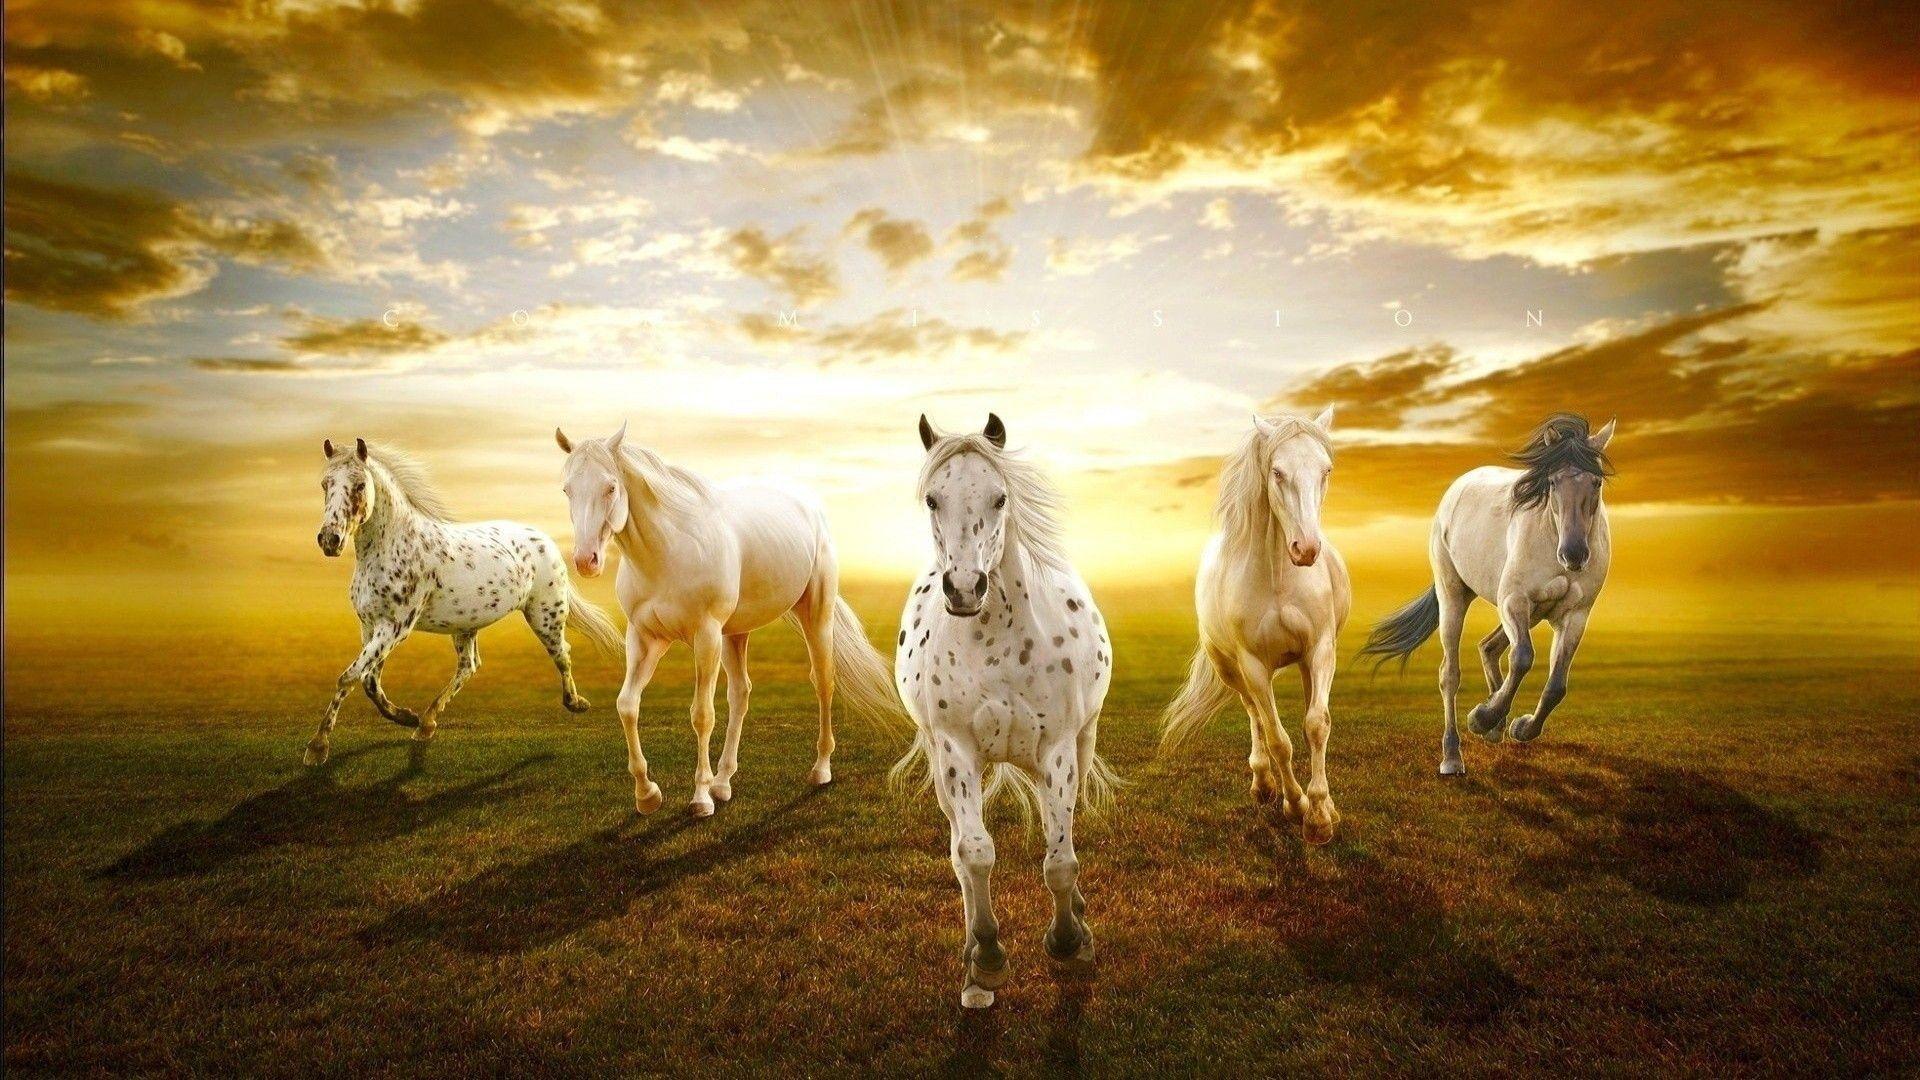 7 Horses Wallpapers - Top Free 7 Horses Backgrounds ...